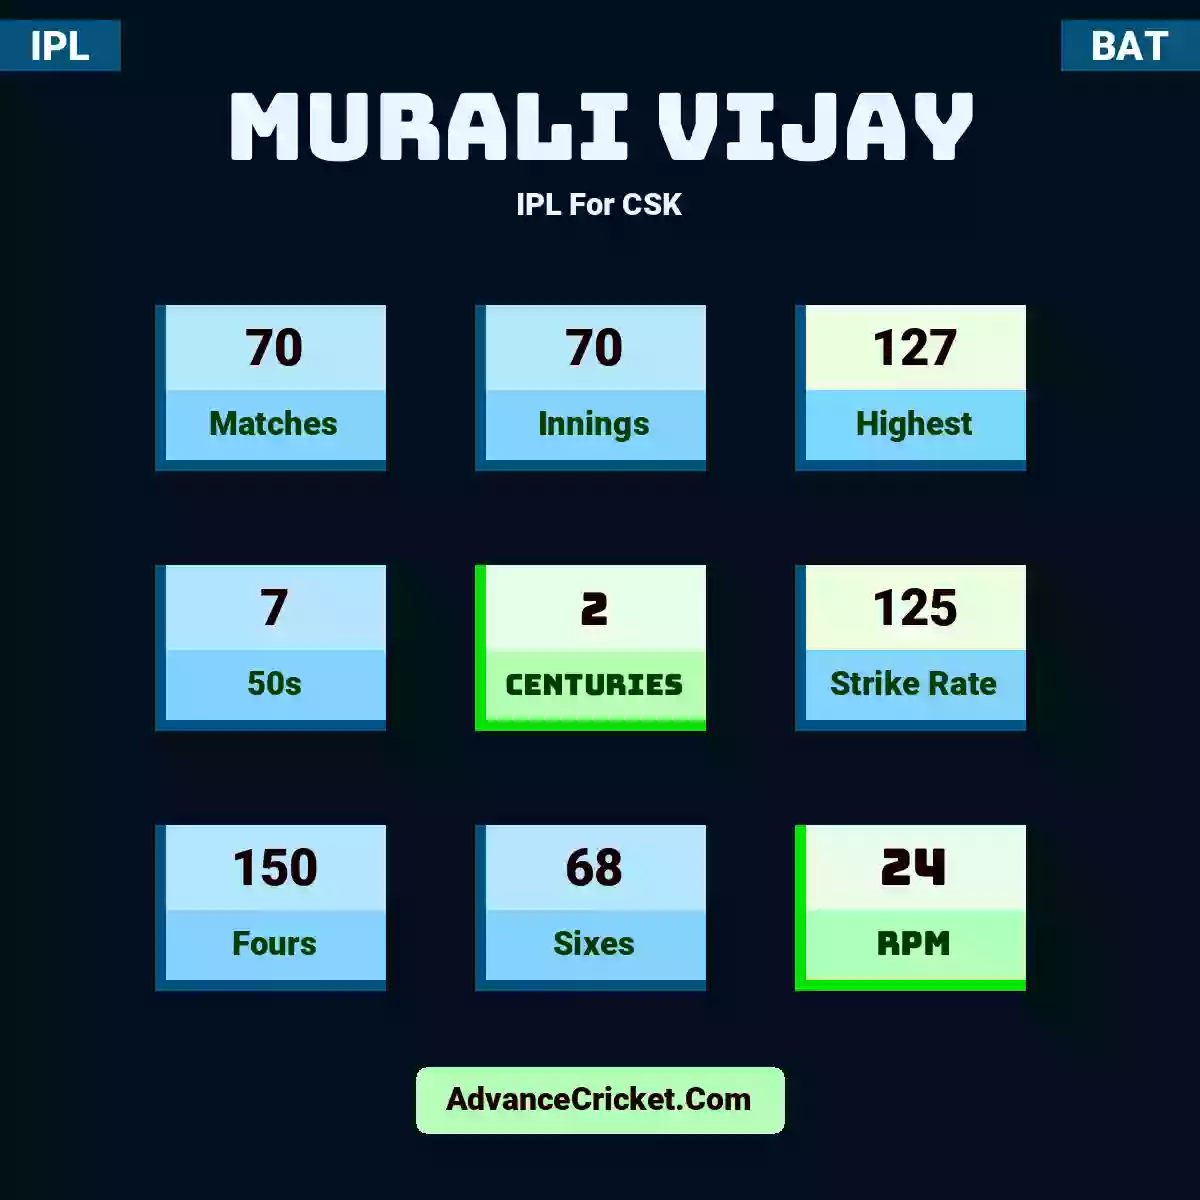 Murali Vijay IPL  For CSK, Murali Vijay played 70 matches, scored 127 runs as highest, 7 half-centuries, and 2 centuries, with a strike rate of 125. M.Vijay hit 150 fours and 68 sixes, with an RPM of 24.